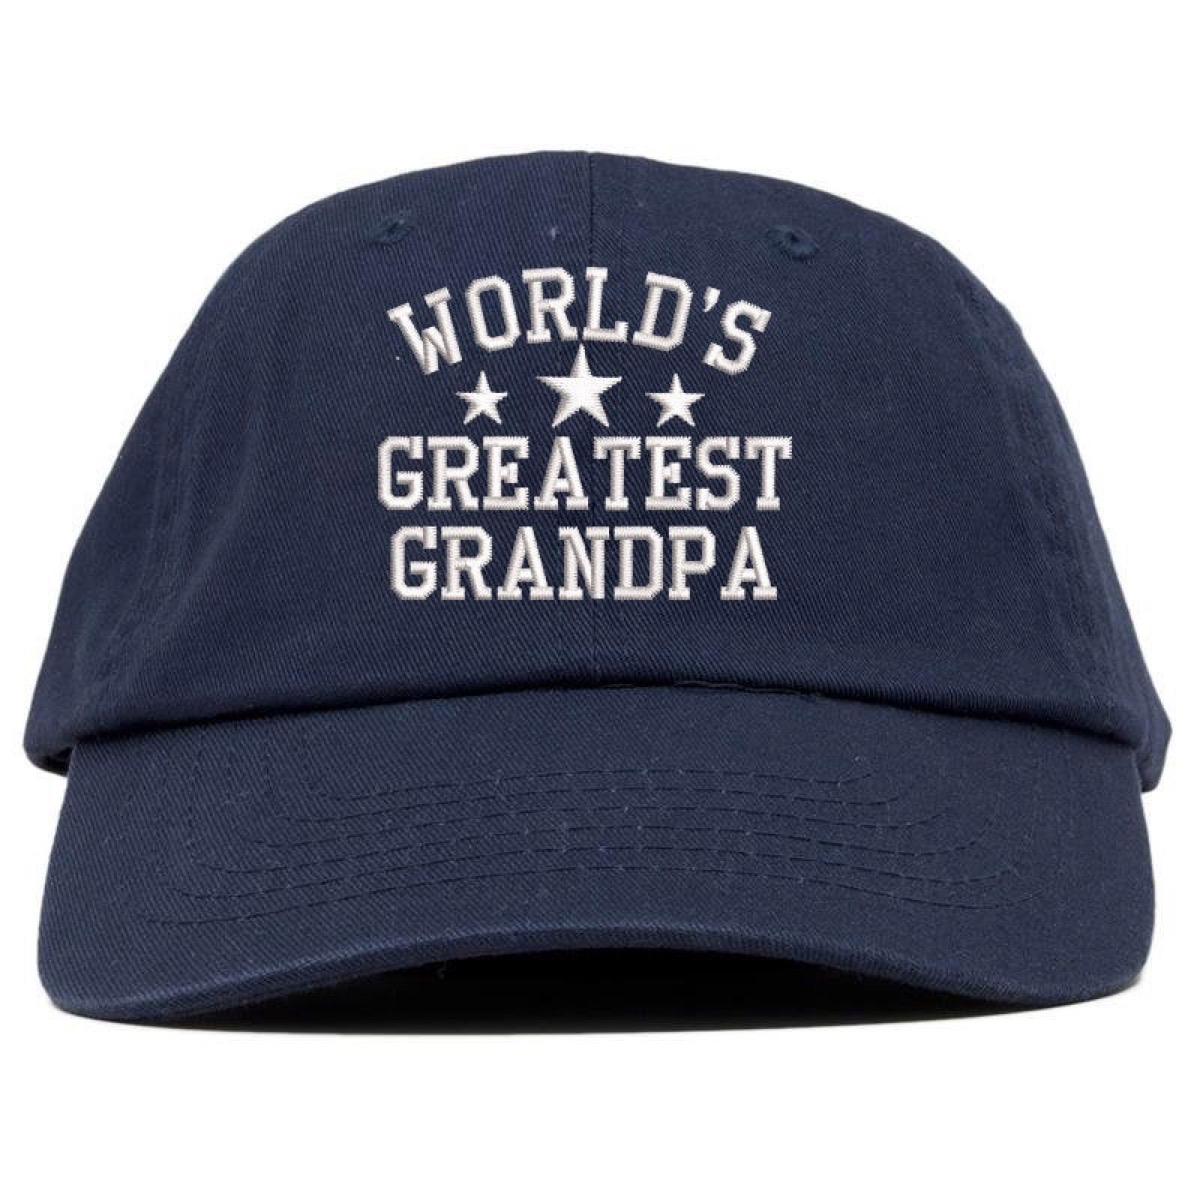 world's greatest grandpa hat, best gifts for grandparents